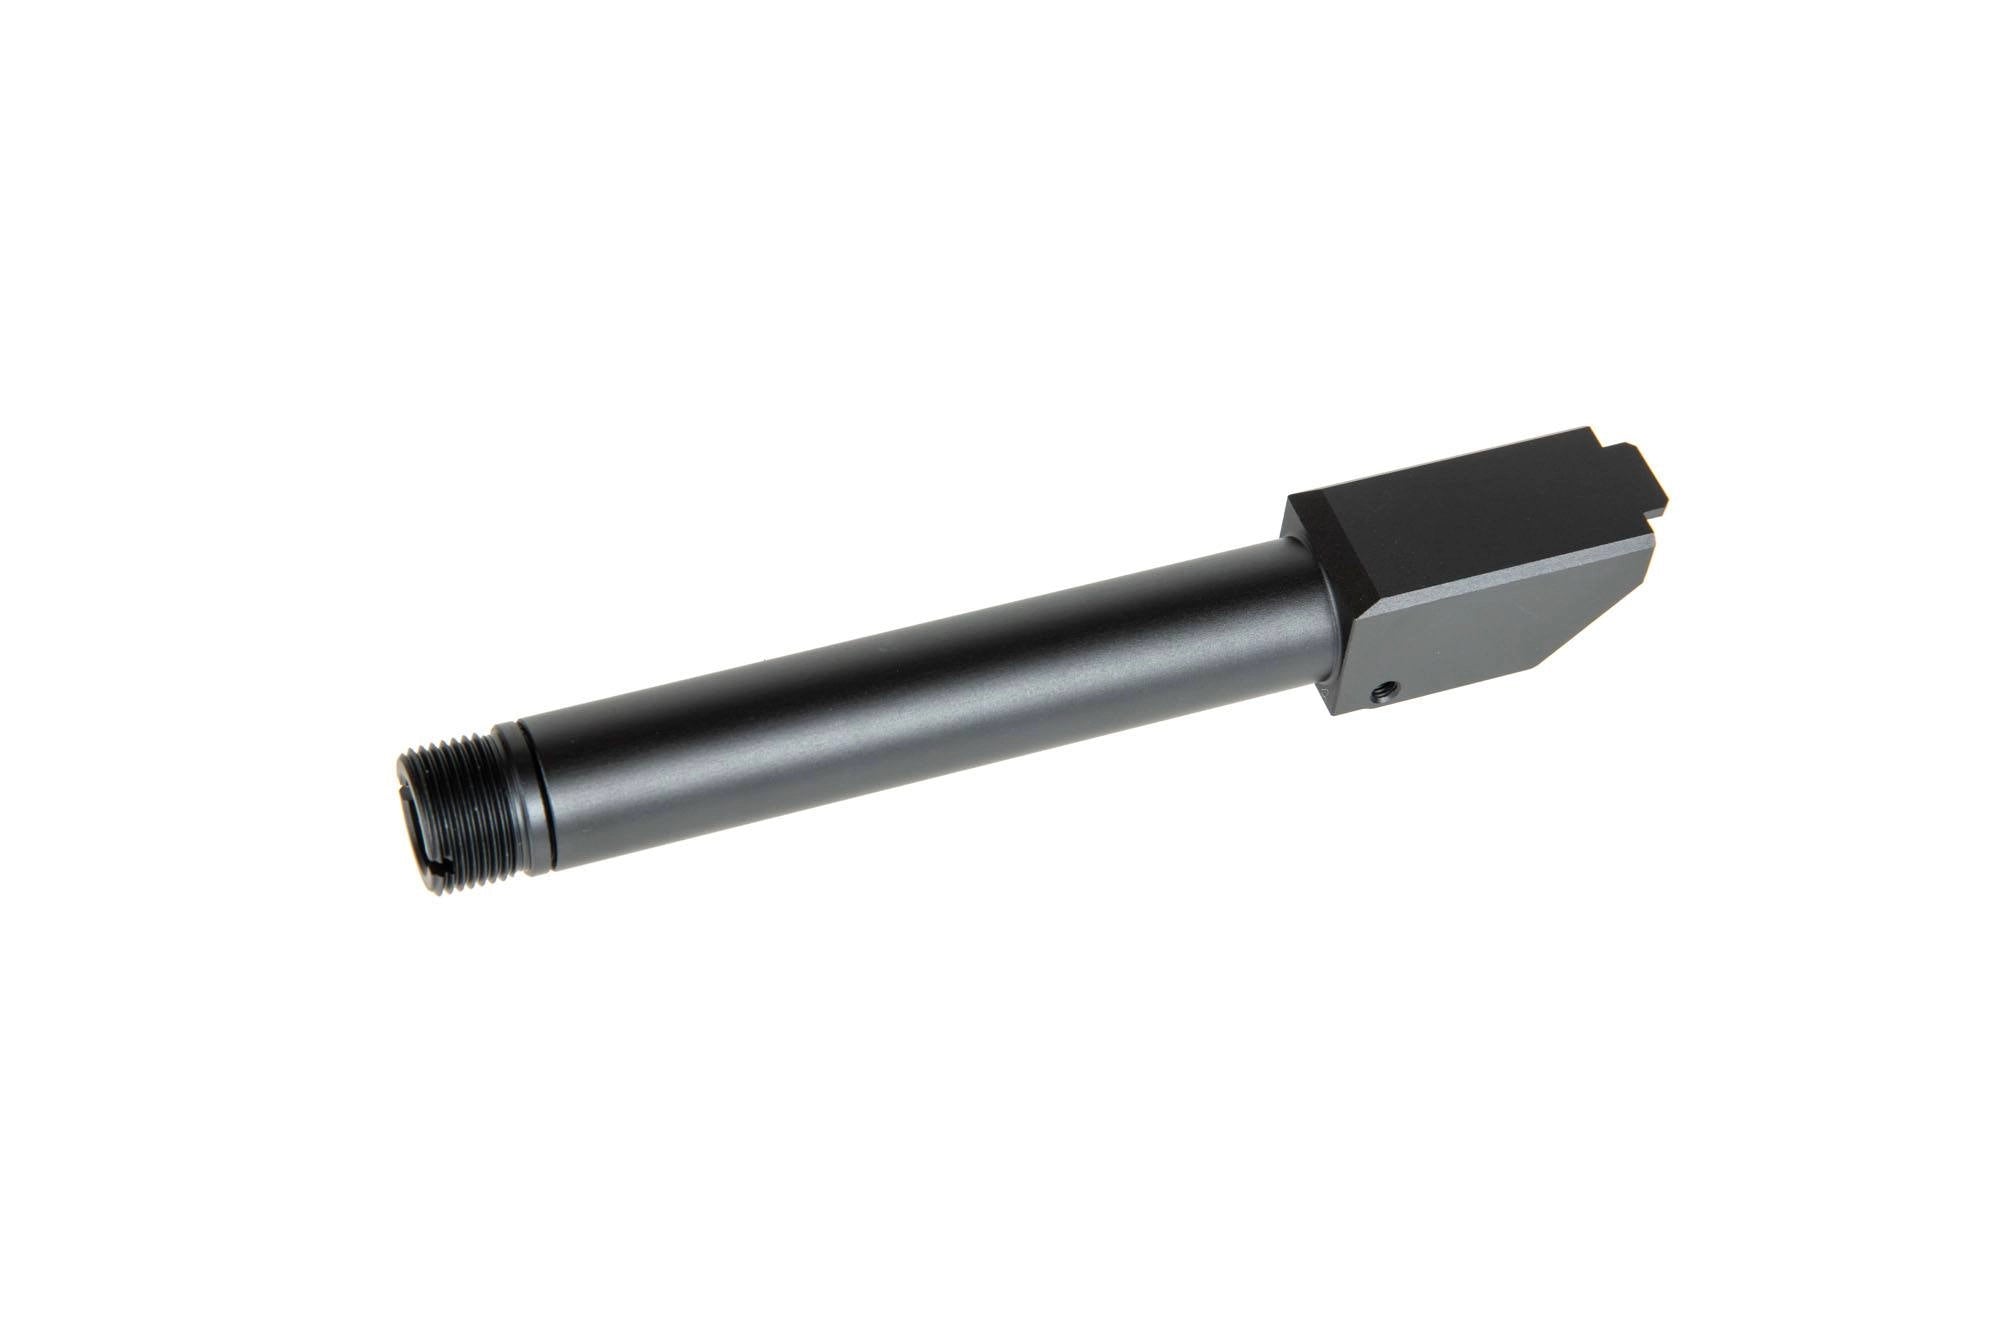 Non-Recoiling 2 Way Fixed" Outer Barrel for TM G17/G18C/G22 Replicas - Black"